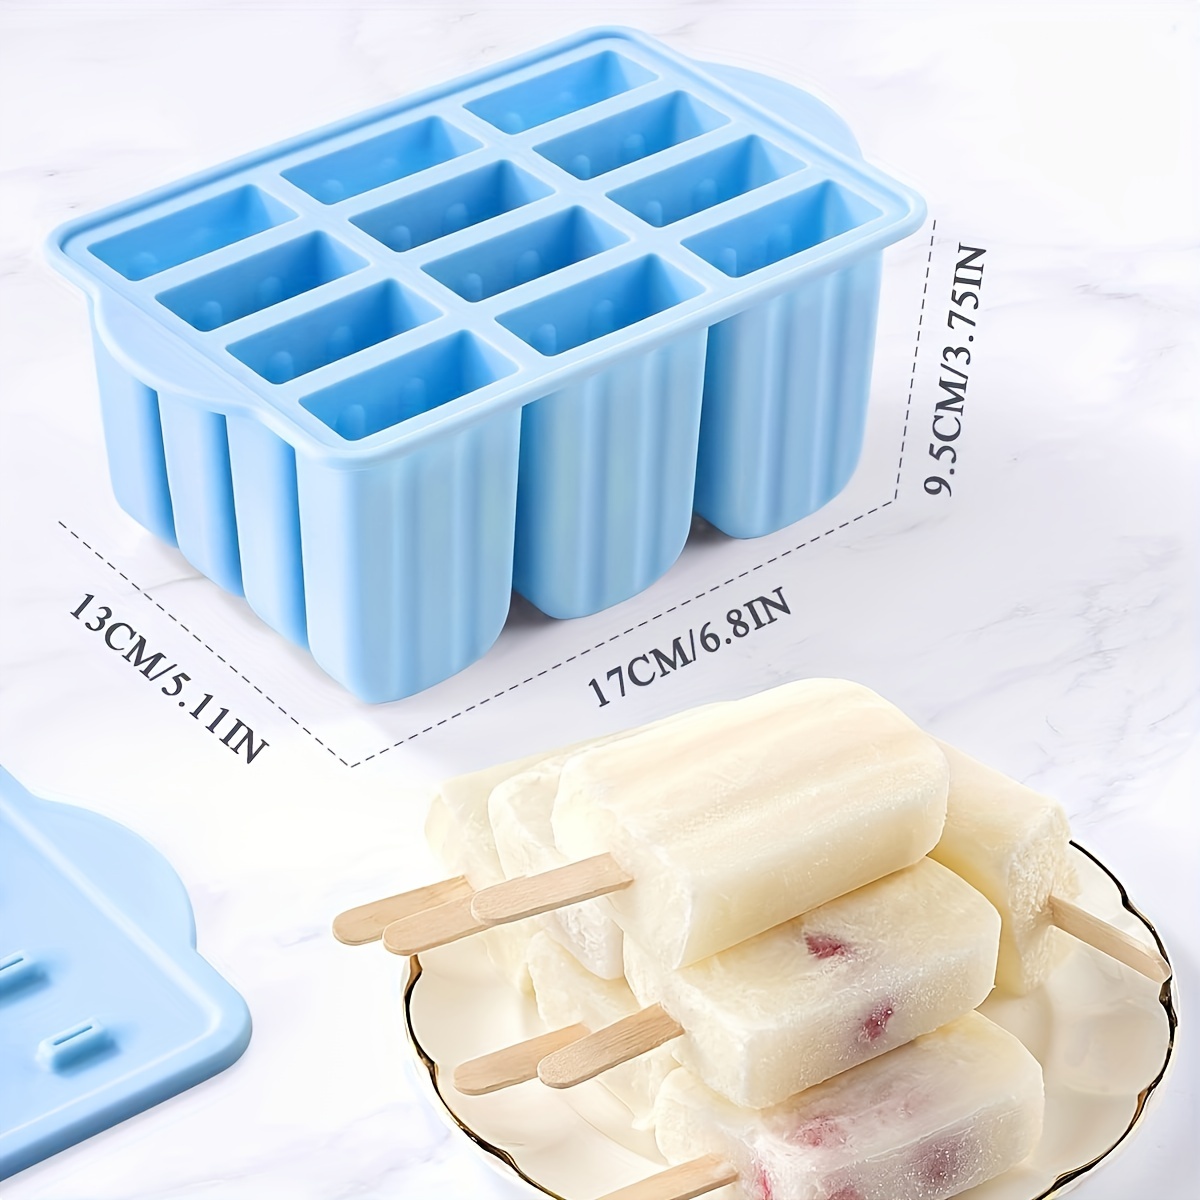 Silicone 3 Popsicle Mold With 3 Reusable Popsicle Sticks, NEW 